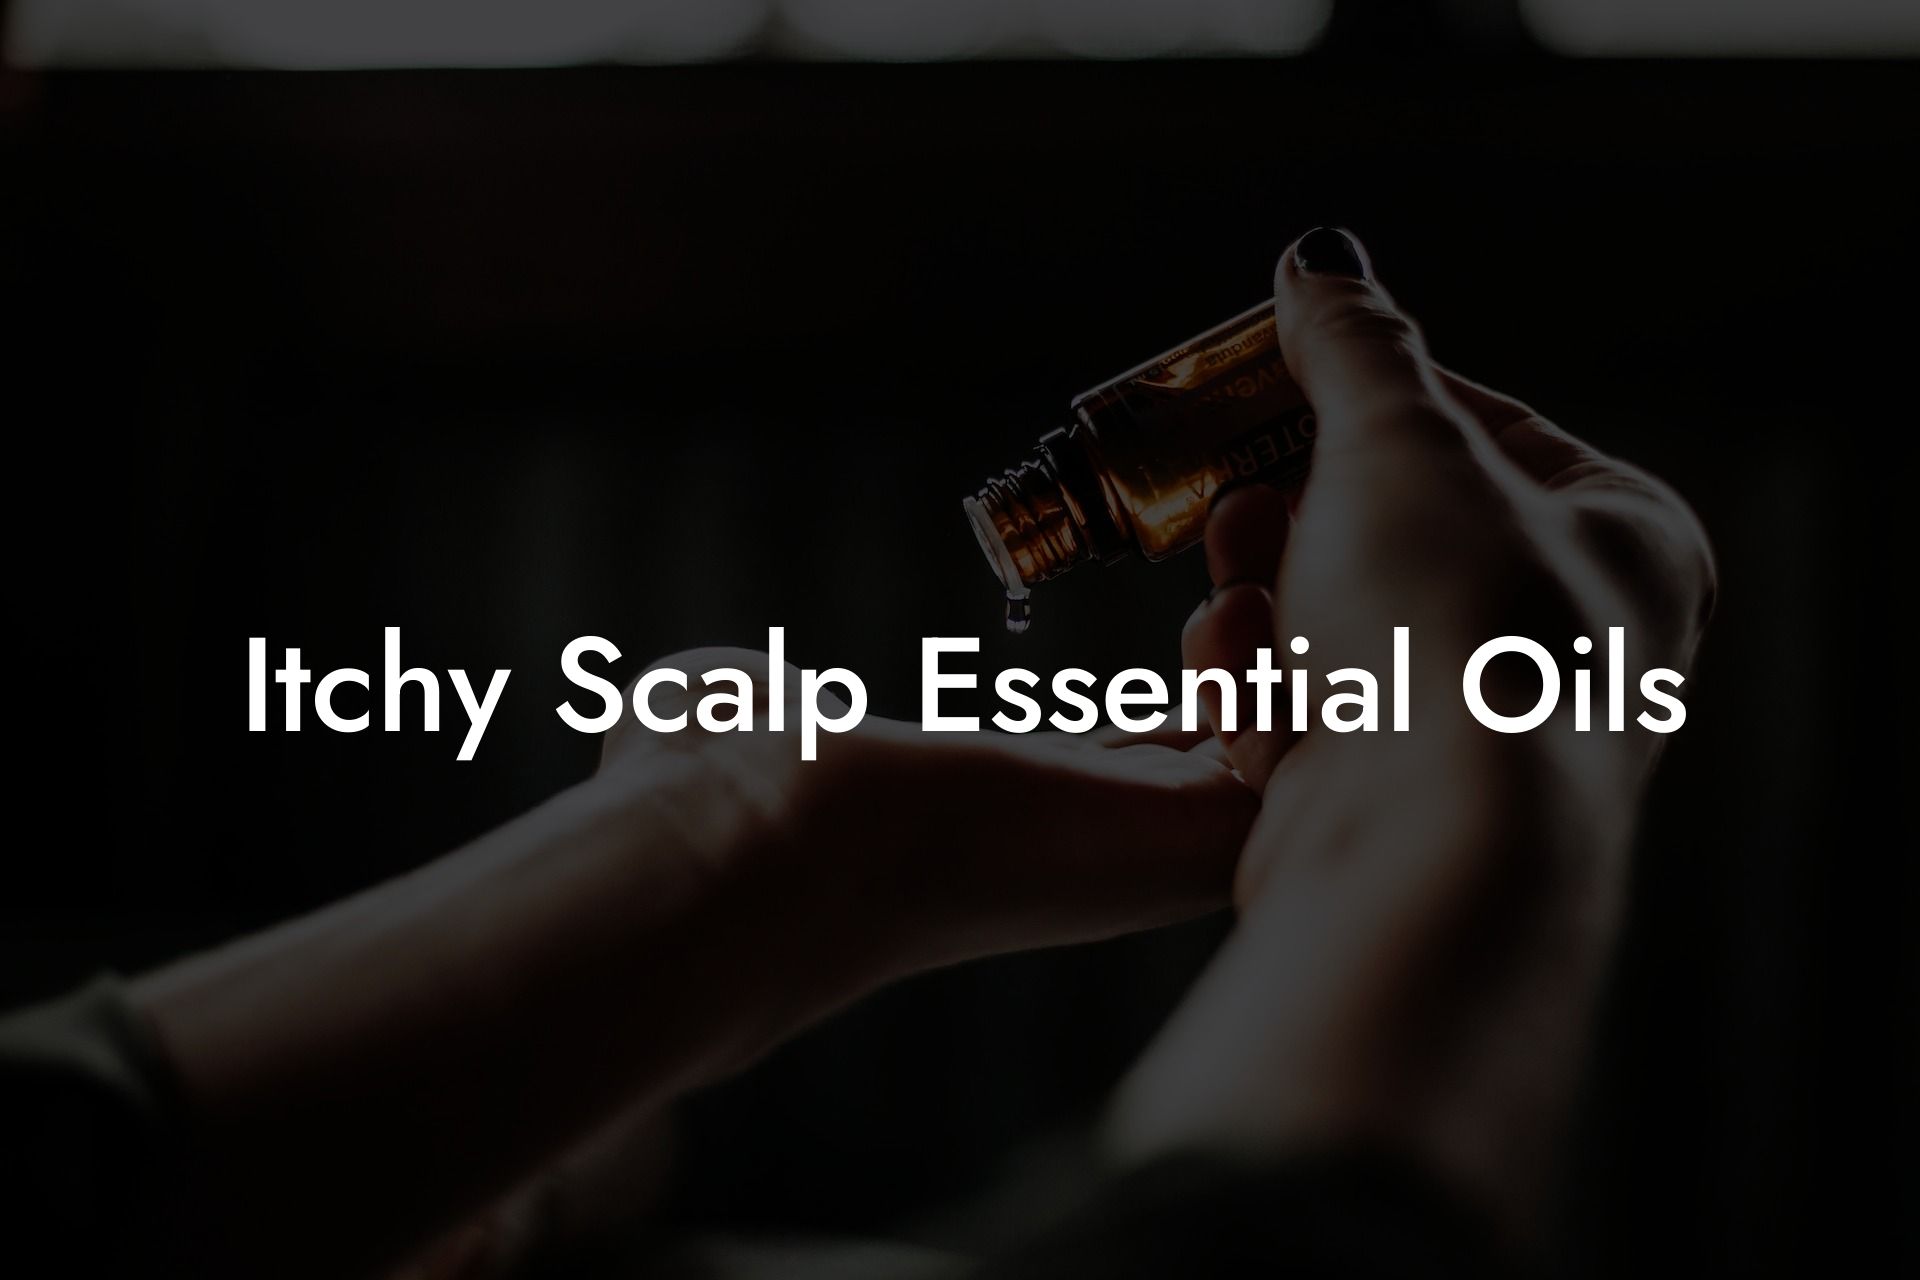 Itchy Scalp Essential Oils